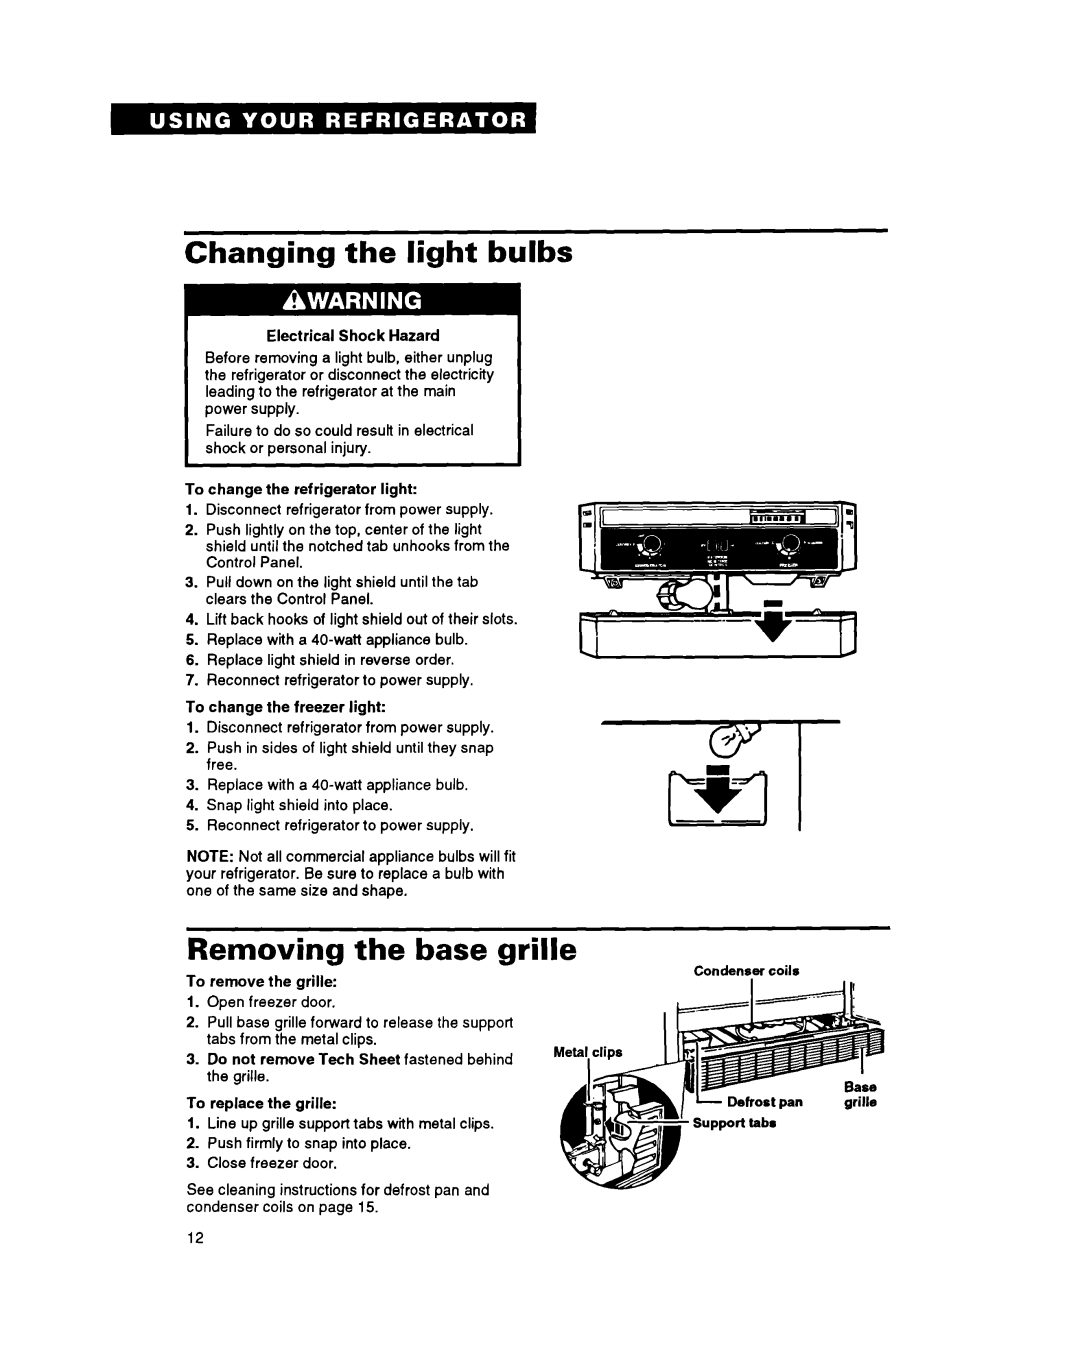 Whirlpool RBZICK important safety instructions 9’ w WI, Changing the light bulbs, Removing the base grille 